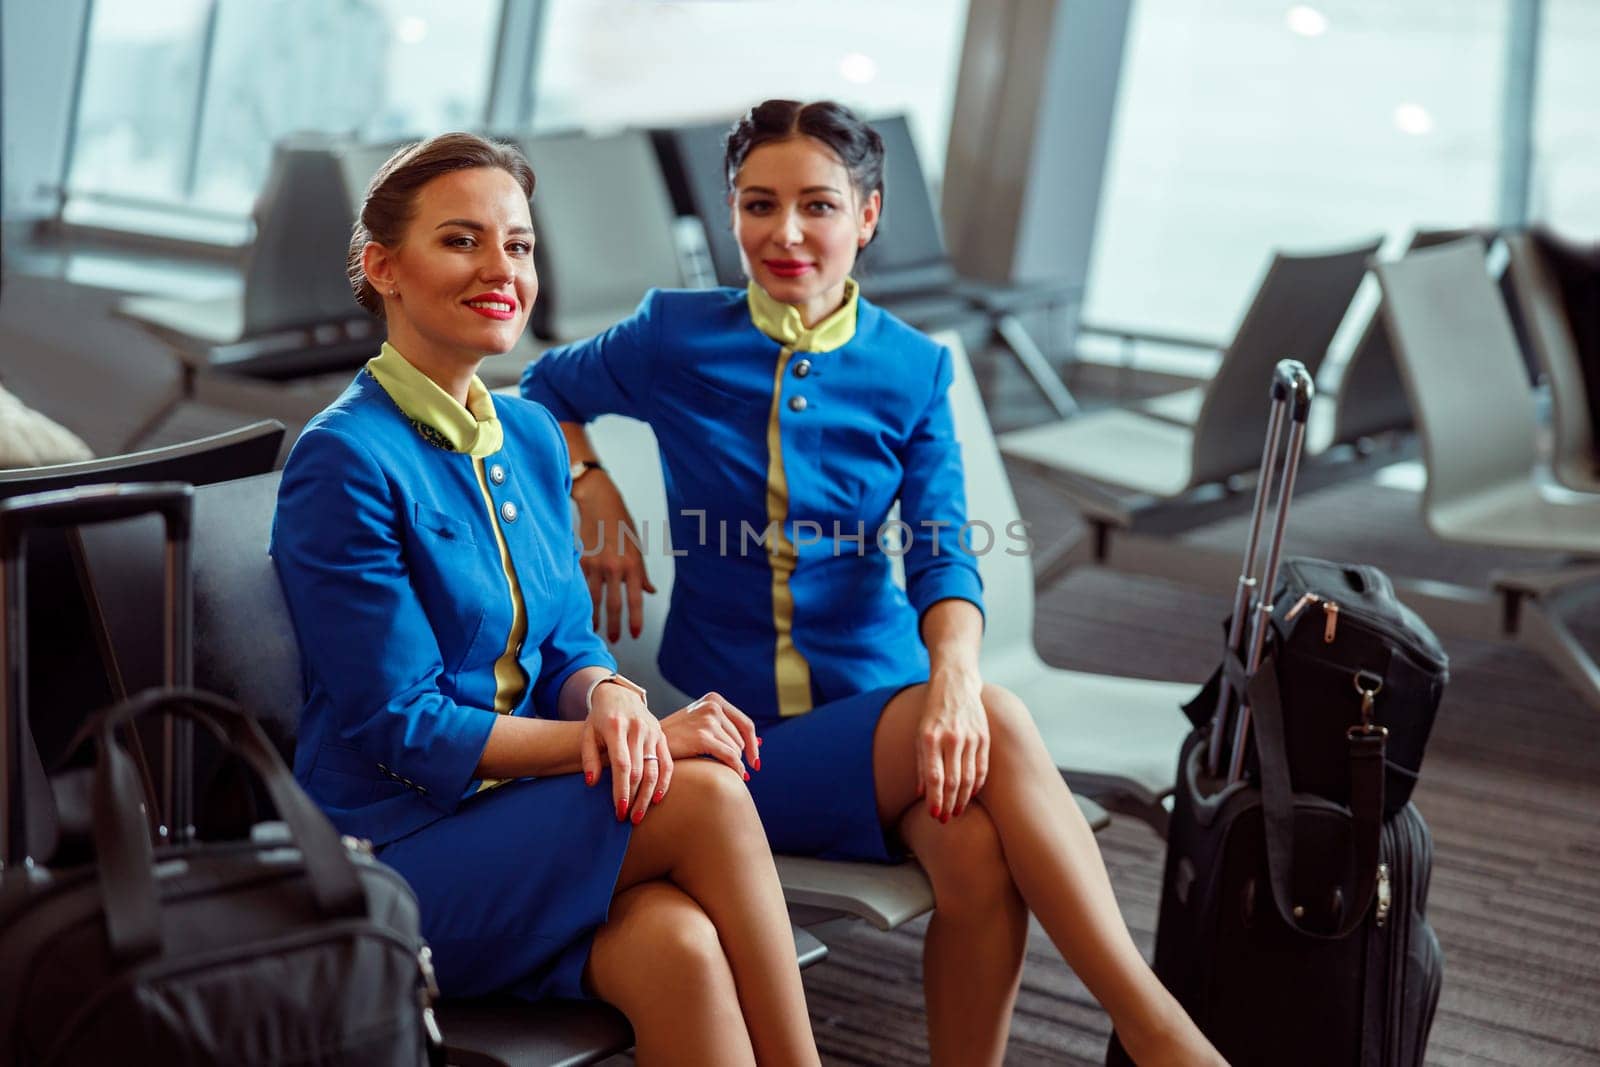 Female flight attendants in air hostess uniform looking at camera and smiling while sitting on chairs in passenger departure lounge